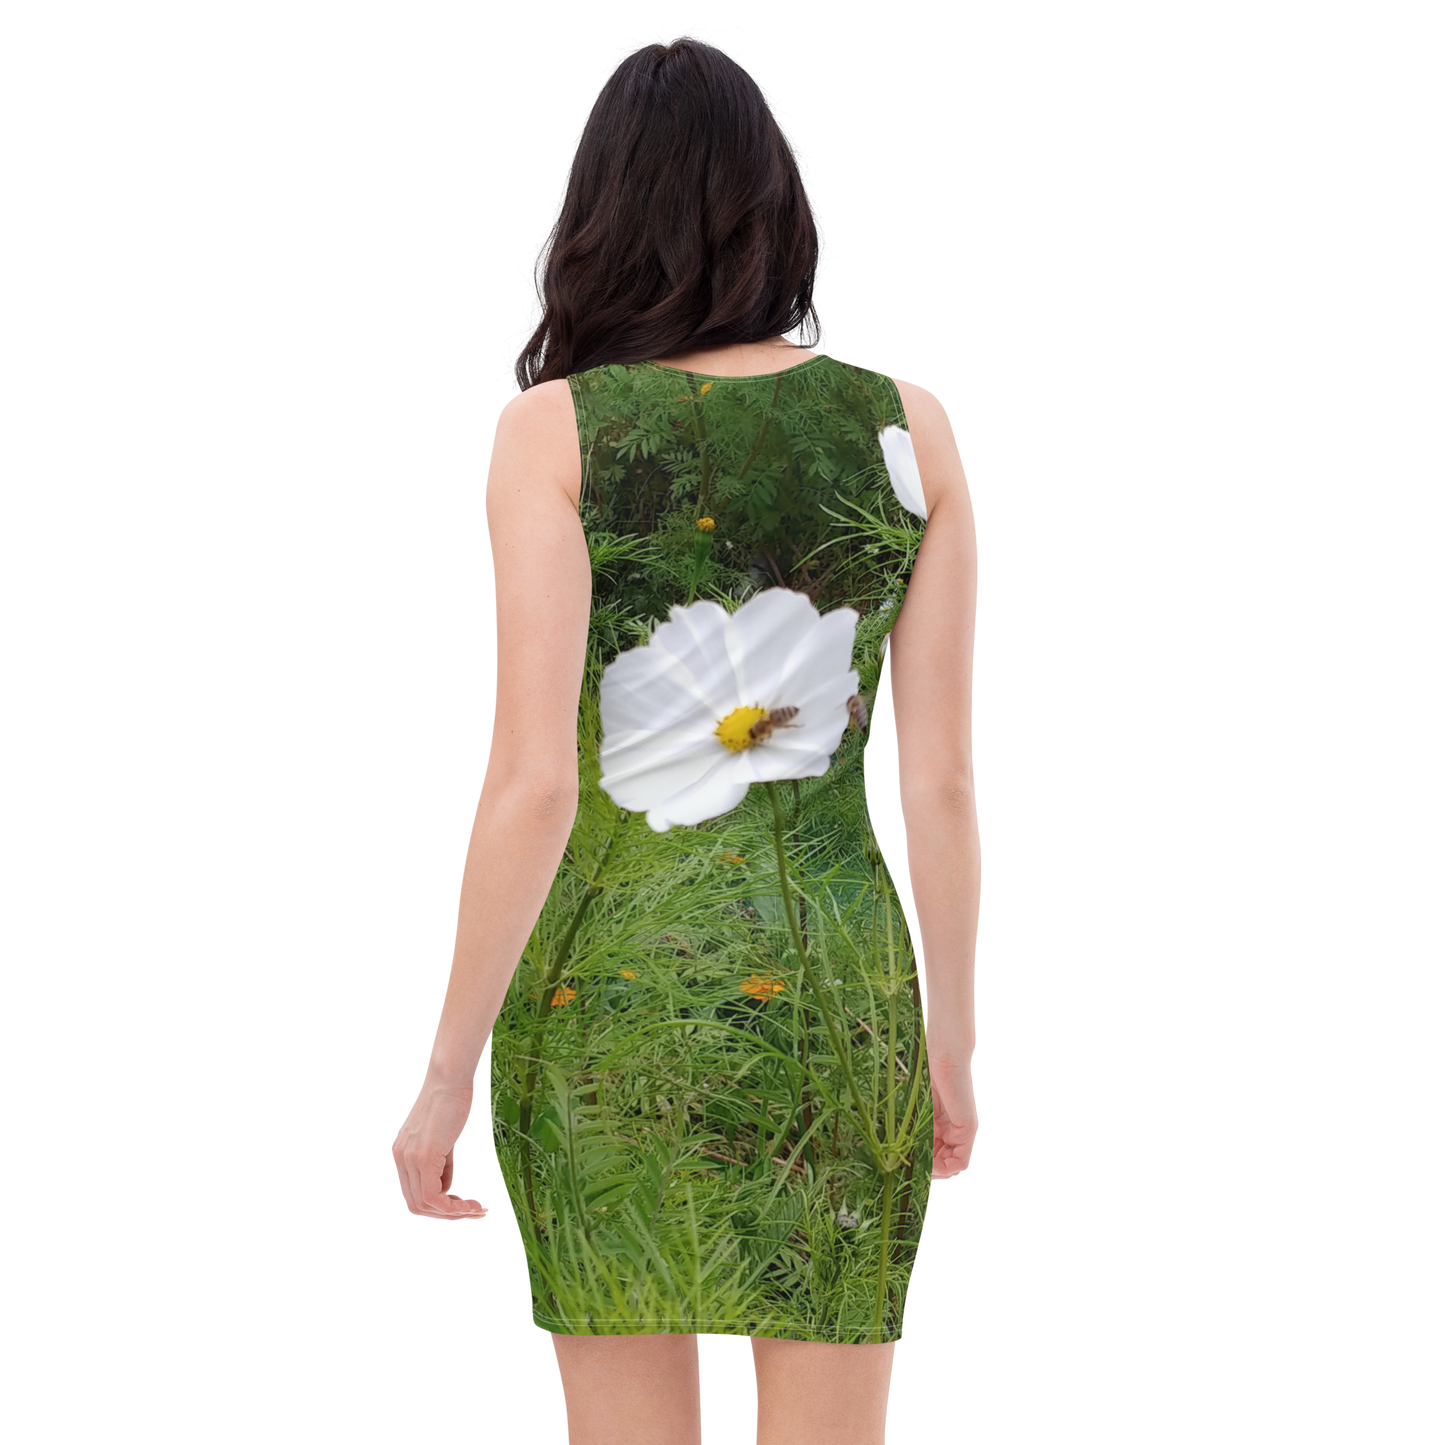 The FLOWER LOVE Collection - "Captivating Cosmos" Design Tank Dress